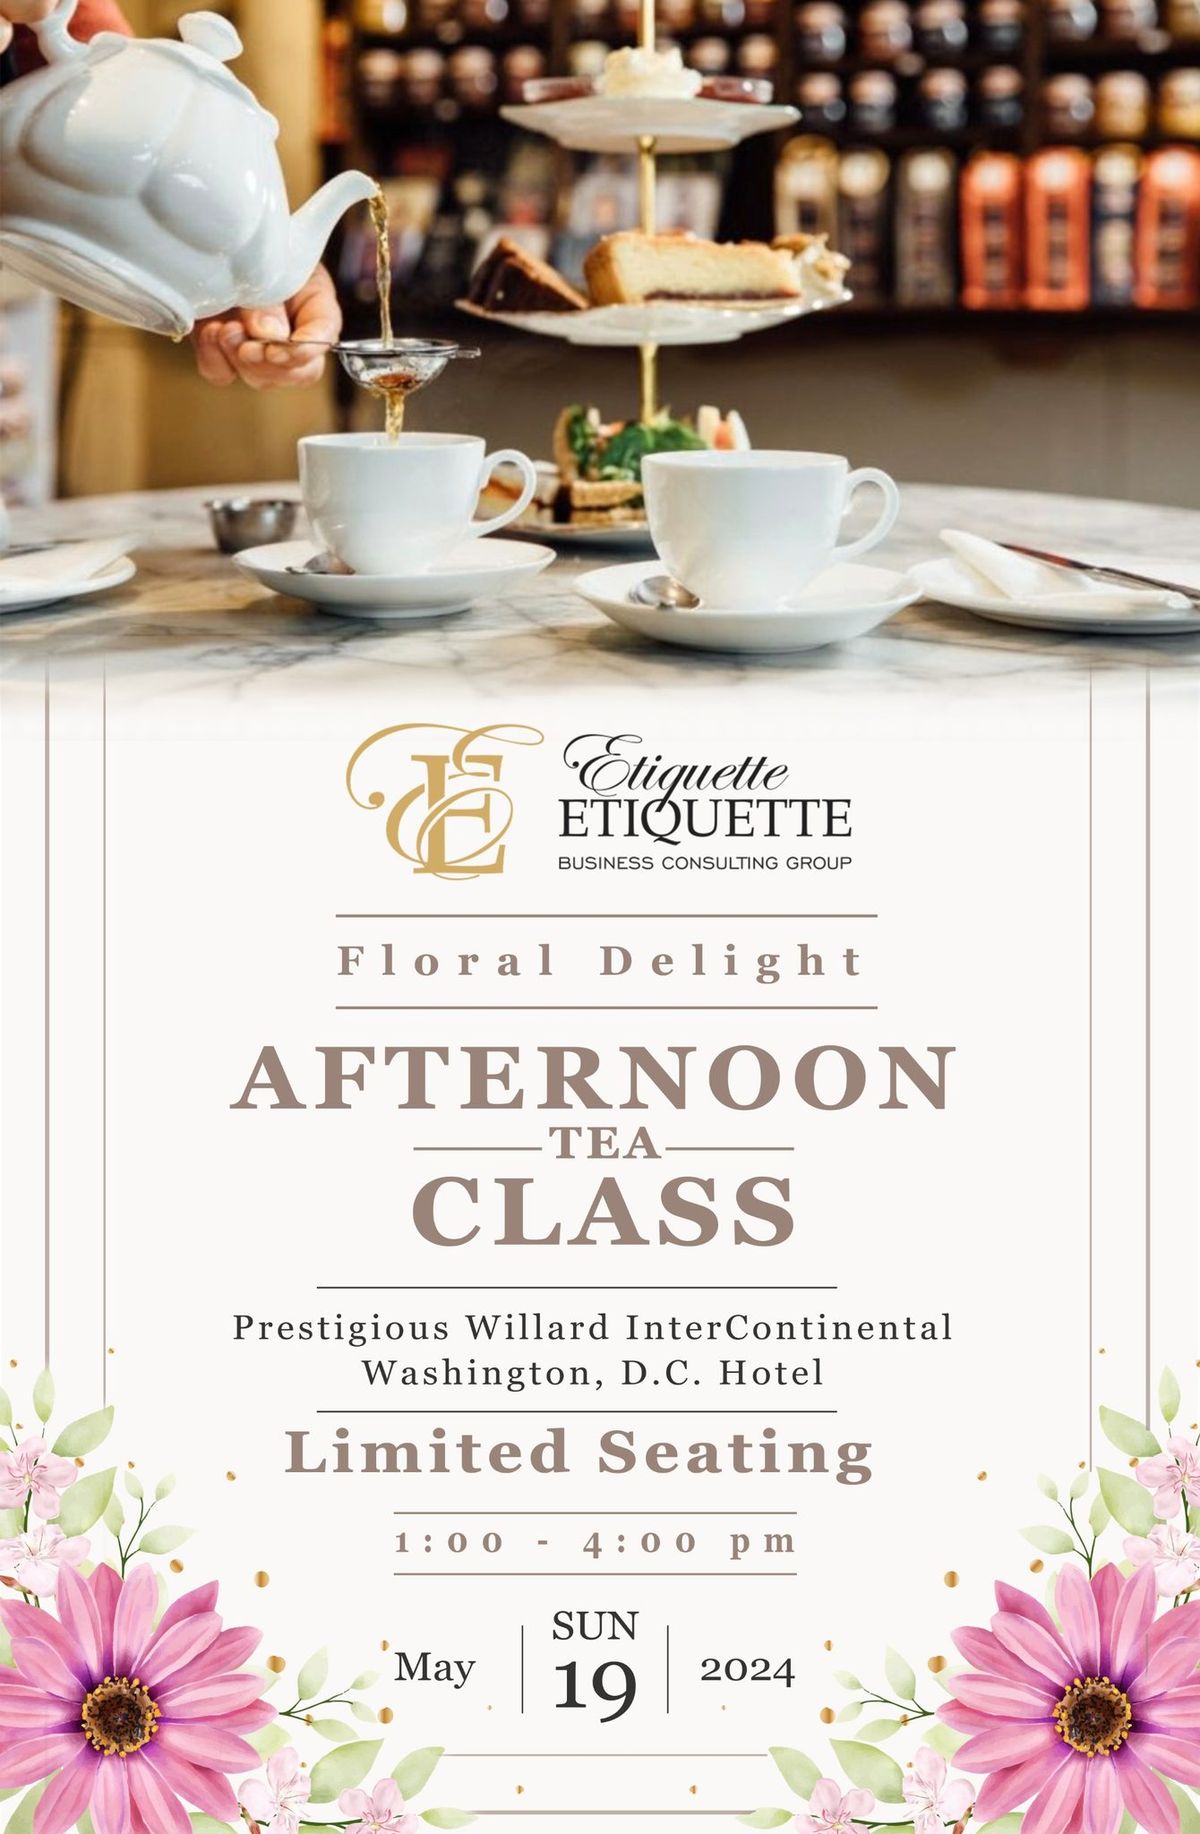 Floral Delight Afternoon Tea Class